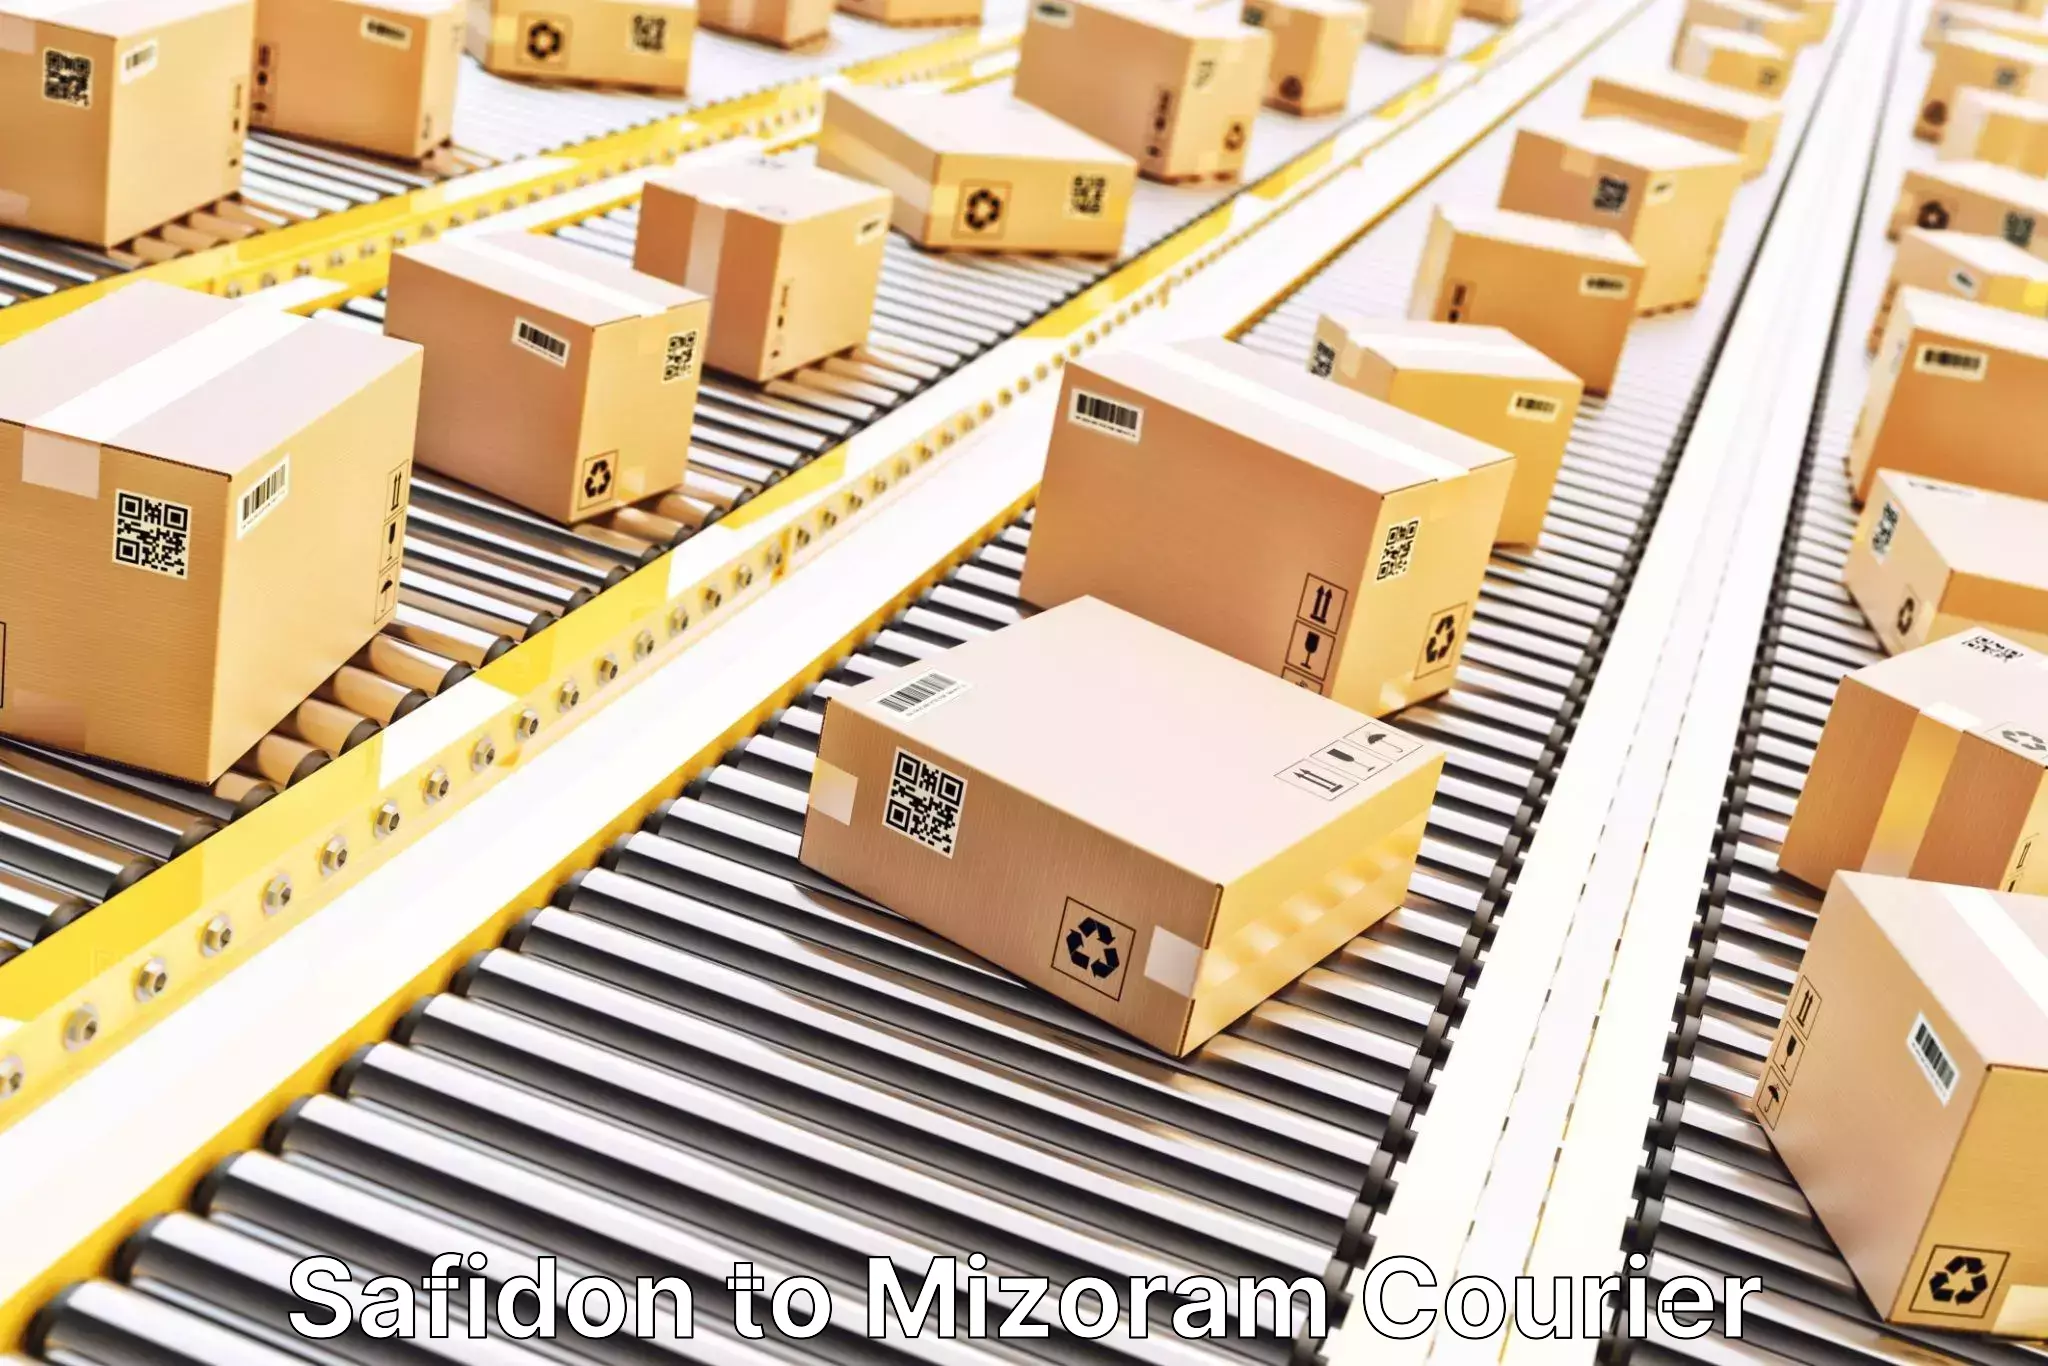 Package delivery network Safidon to Mizoram